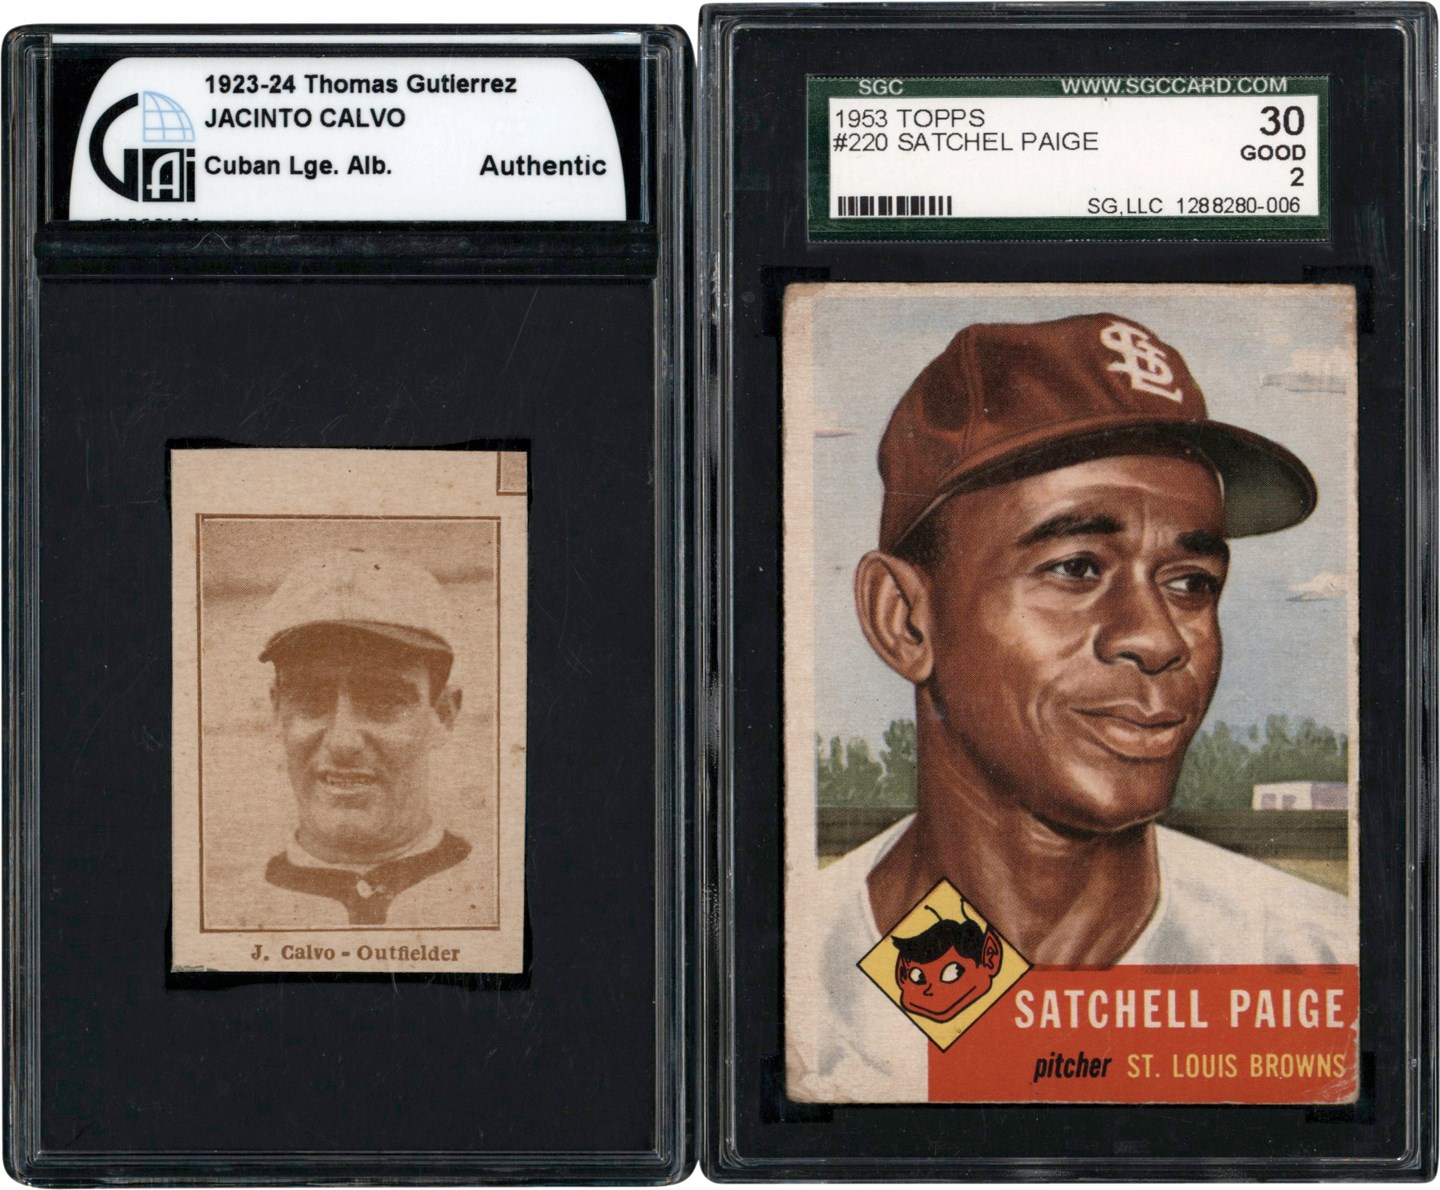 - 912-1968 Vintage Baseball Collection w/1953 Topps Satchell Paige (12)